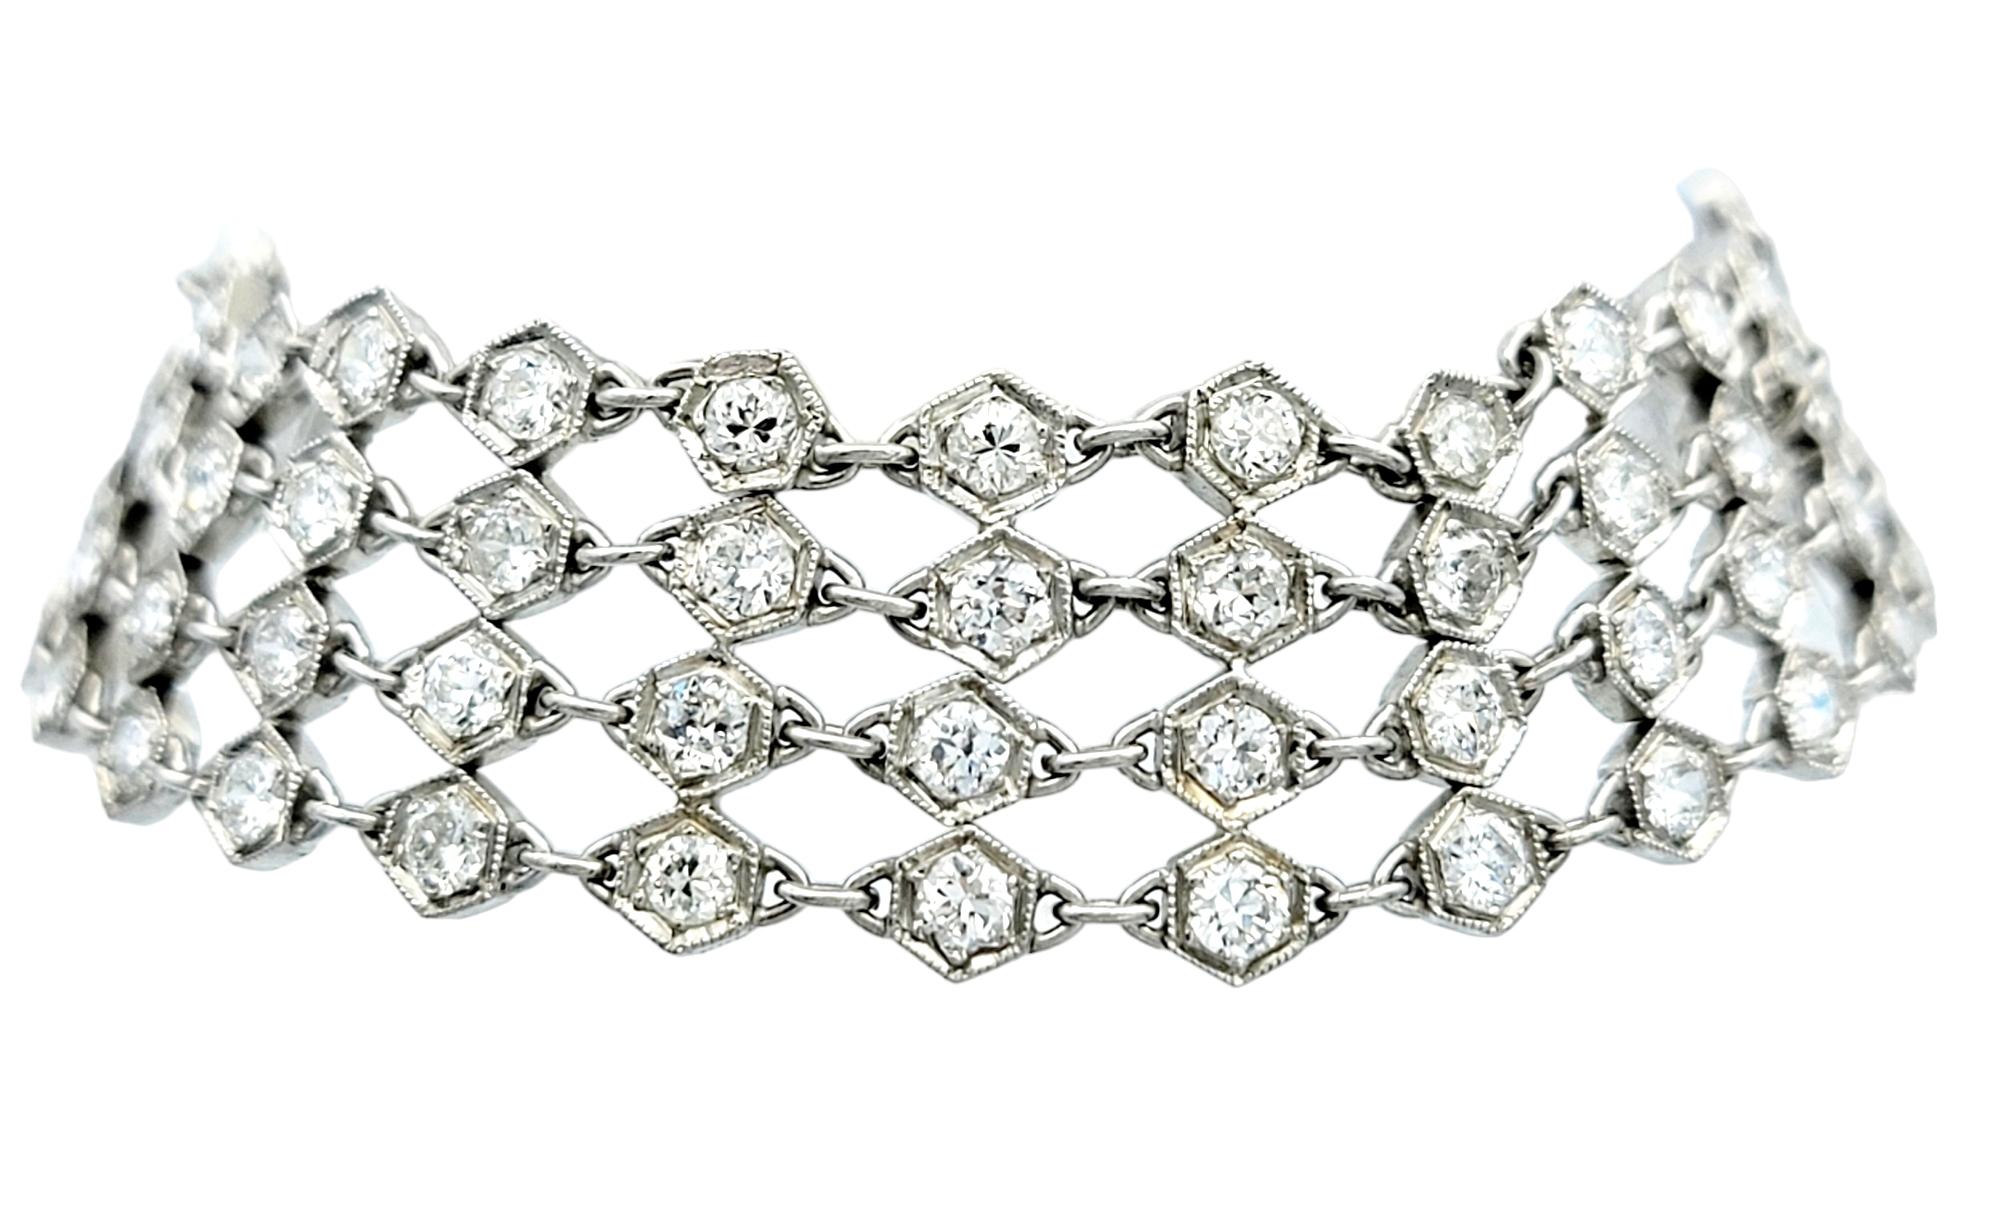 The inner circumference of this bracelet measures 6.13 inches and will comfortably fit a 5.75 - 6 inch wrist. 

In the realm of fine jewelry, this vintage link bracelet pays homage to an era of timeless glamour, seamlessly blending classical